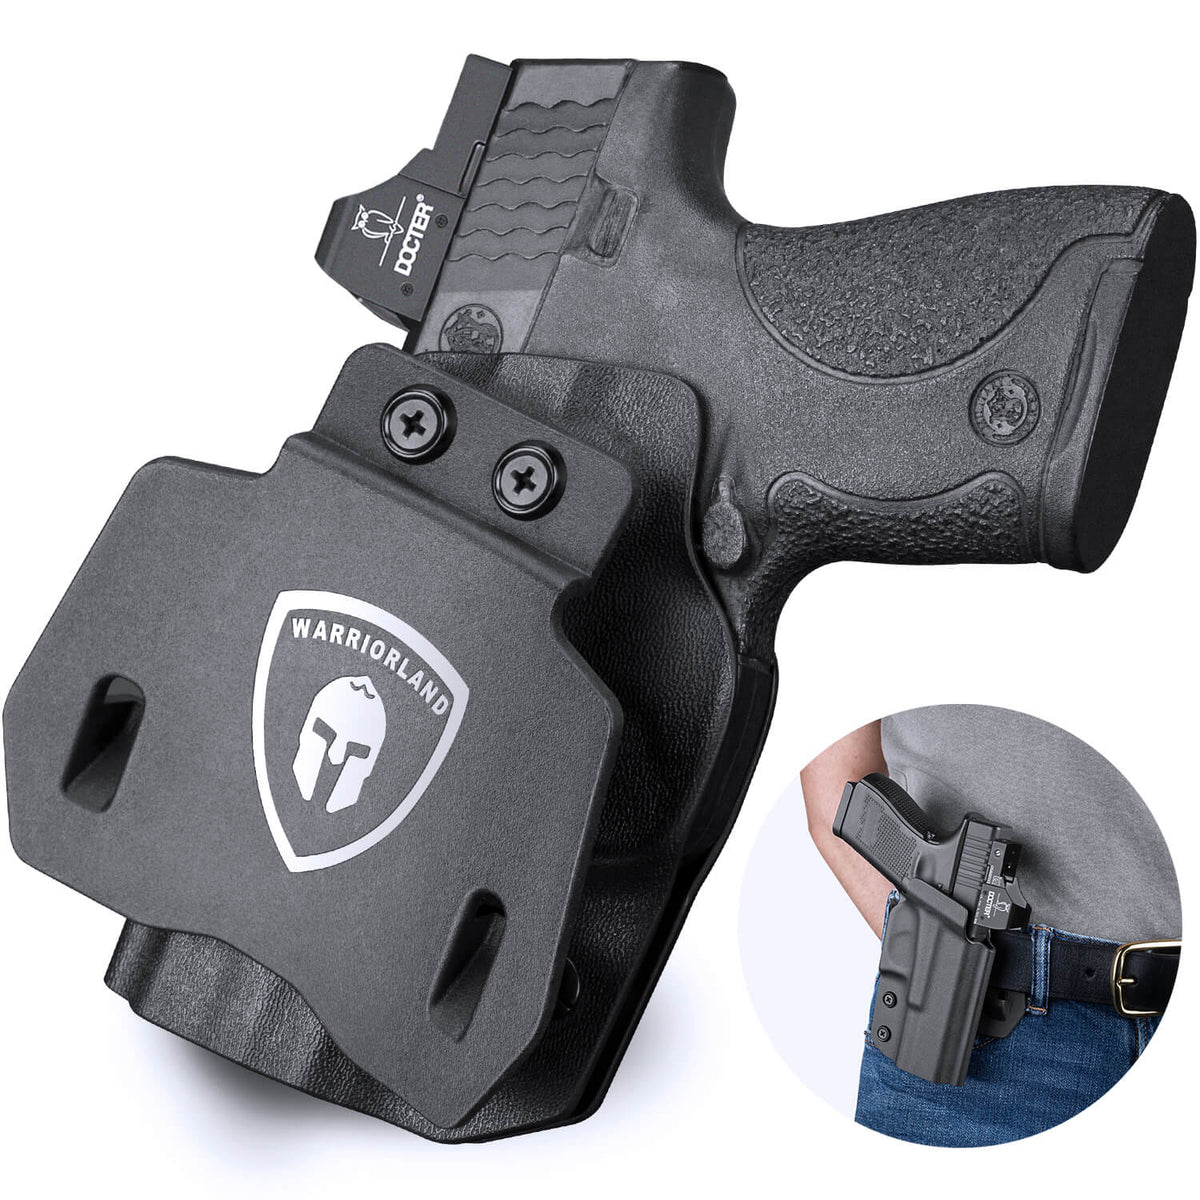 Kydex OWB Open Carry Paddle Holster Smith & Wesson S&W M&P Shield /M2.0  9mm/.40 Pistol